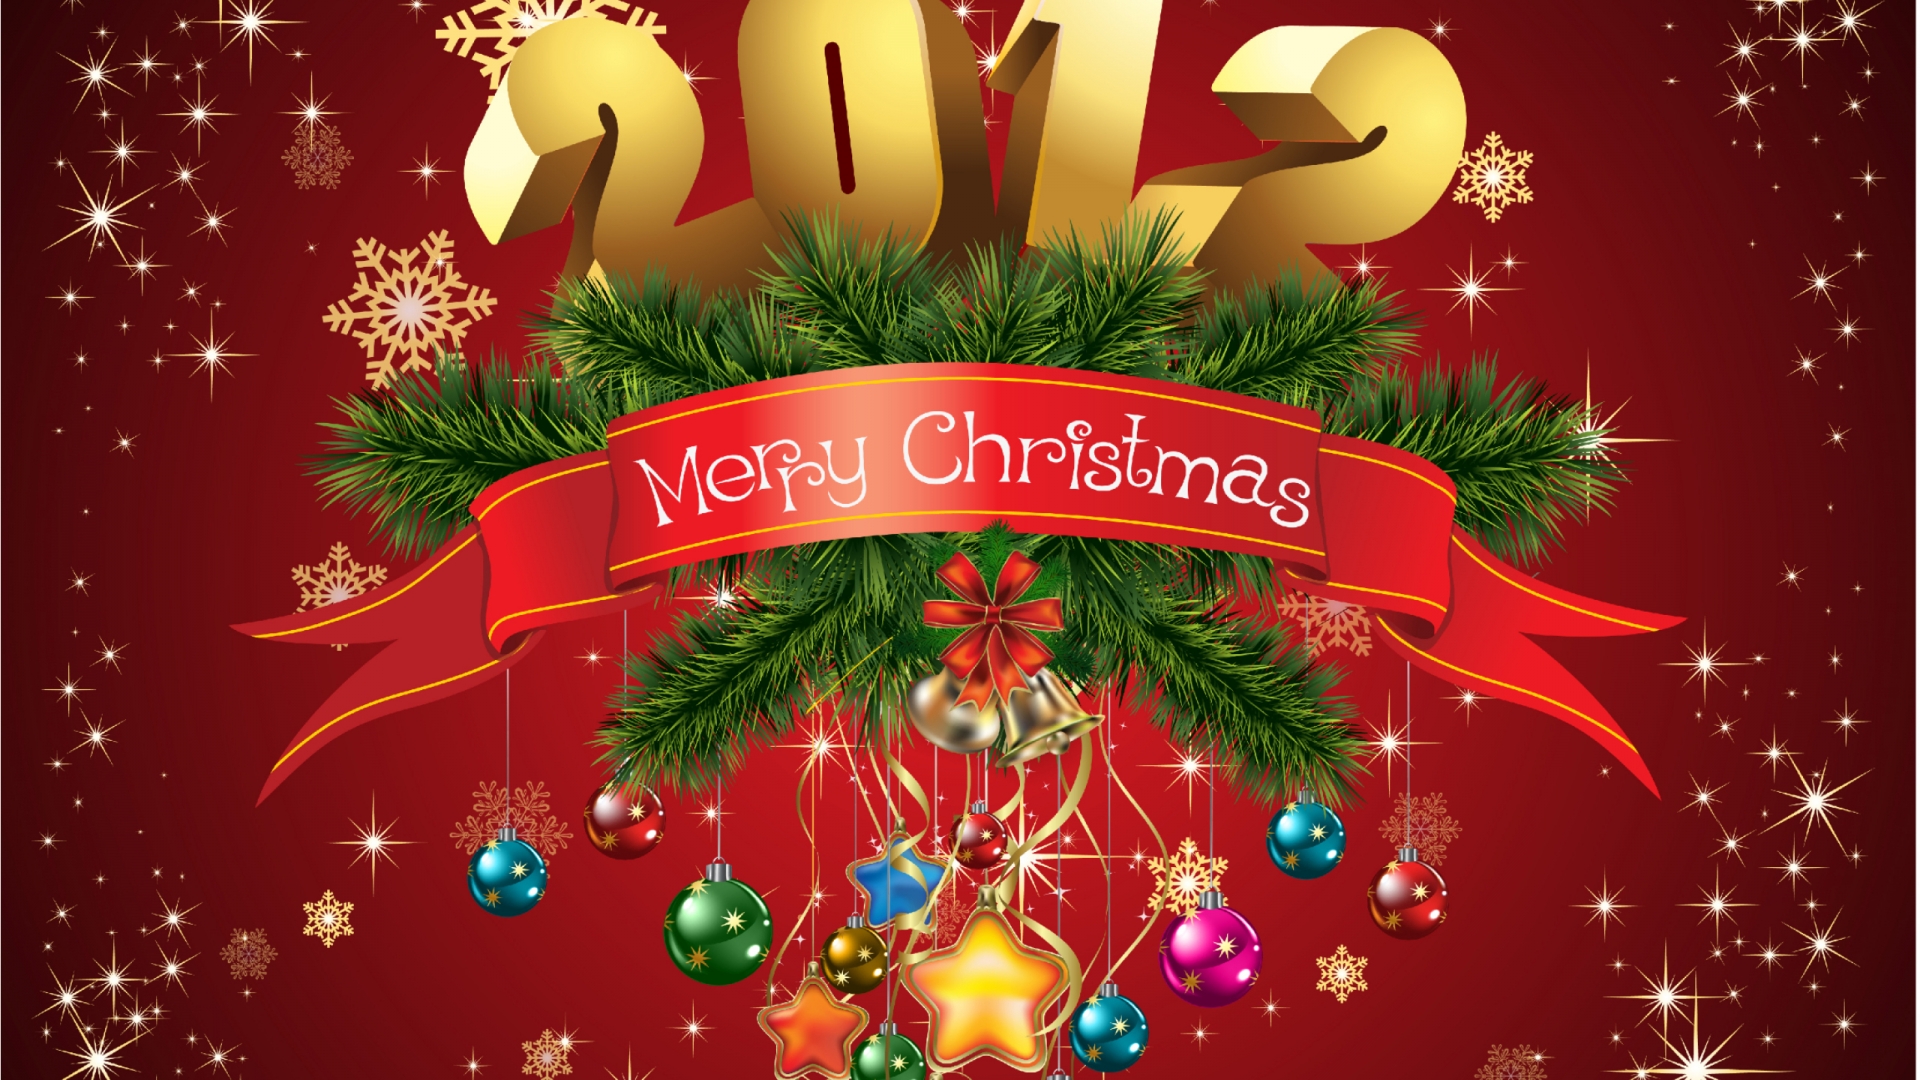 Merry Christmas 2012 for 1920 x 1080 HDTV 1080p resolution